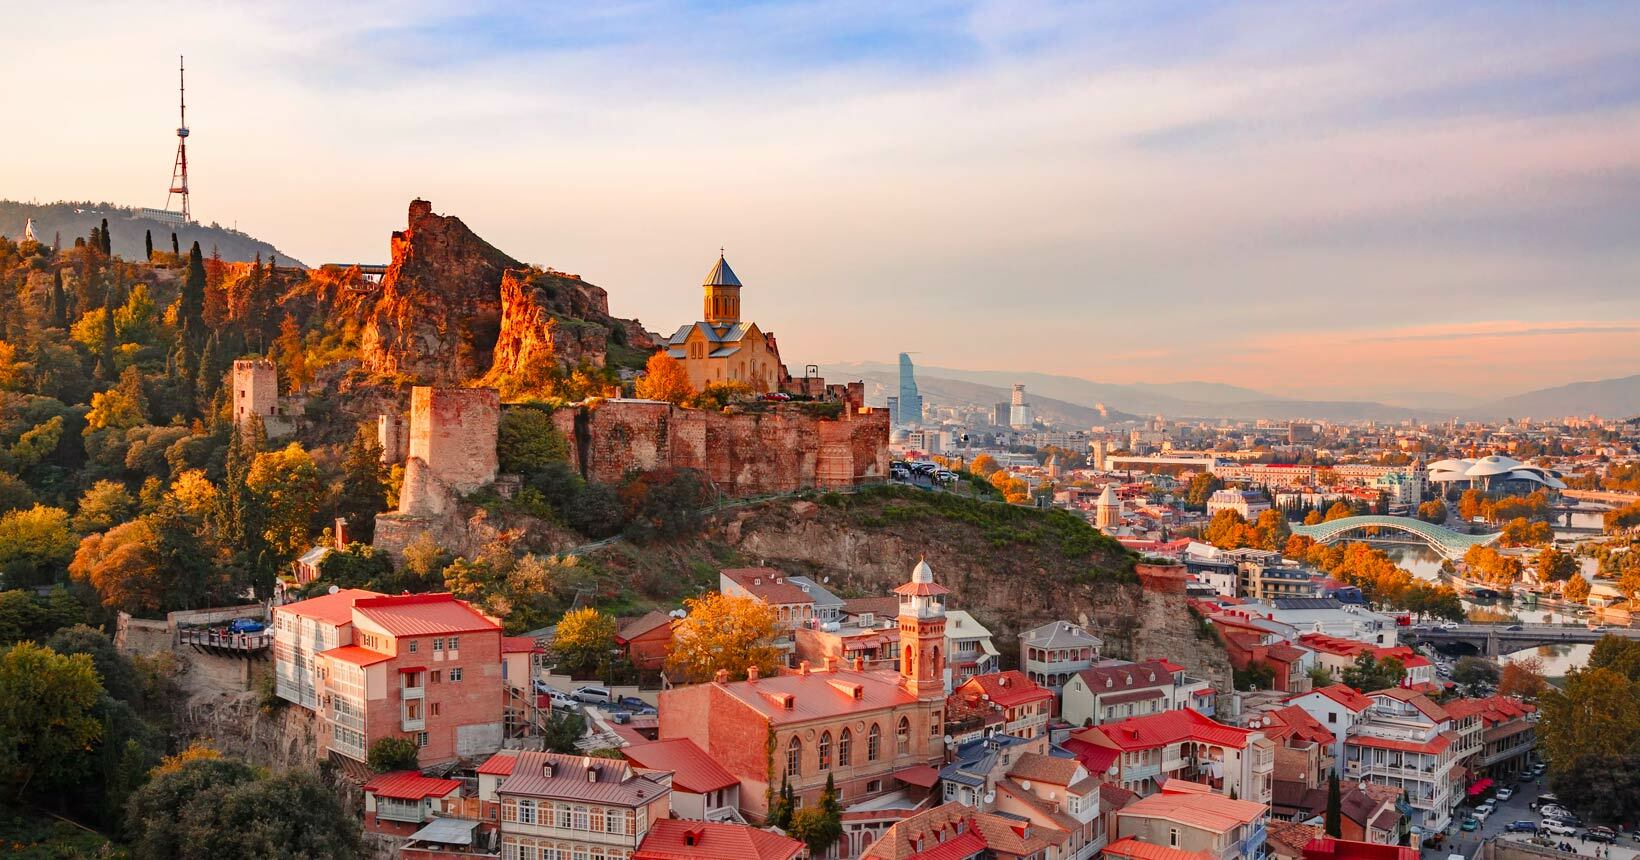 18 fascinating destinations for a quick getaway on your European trip